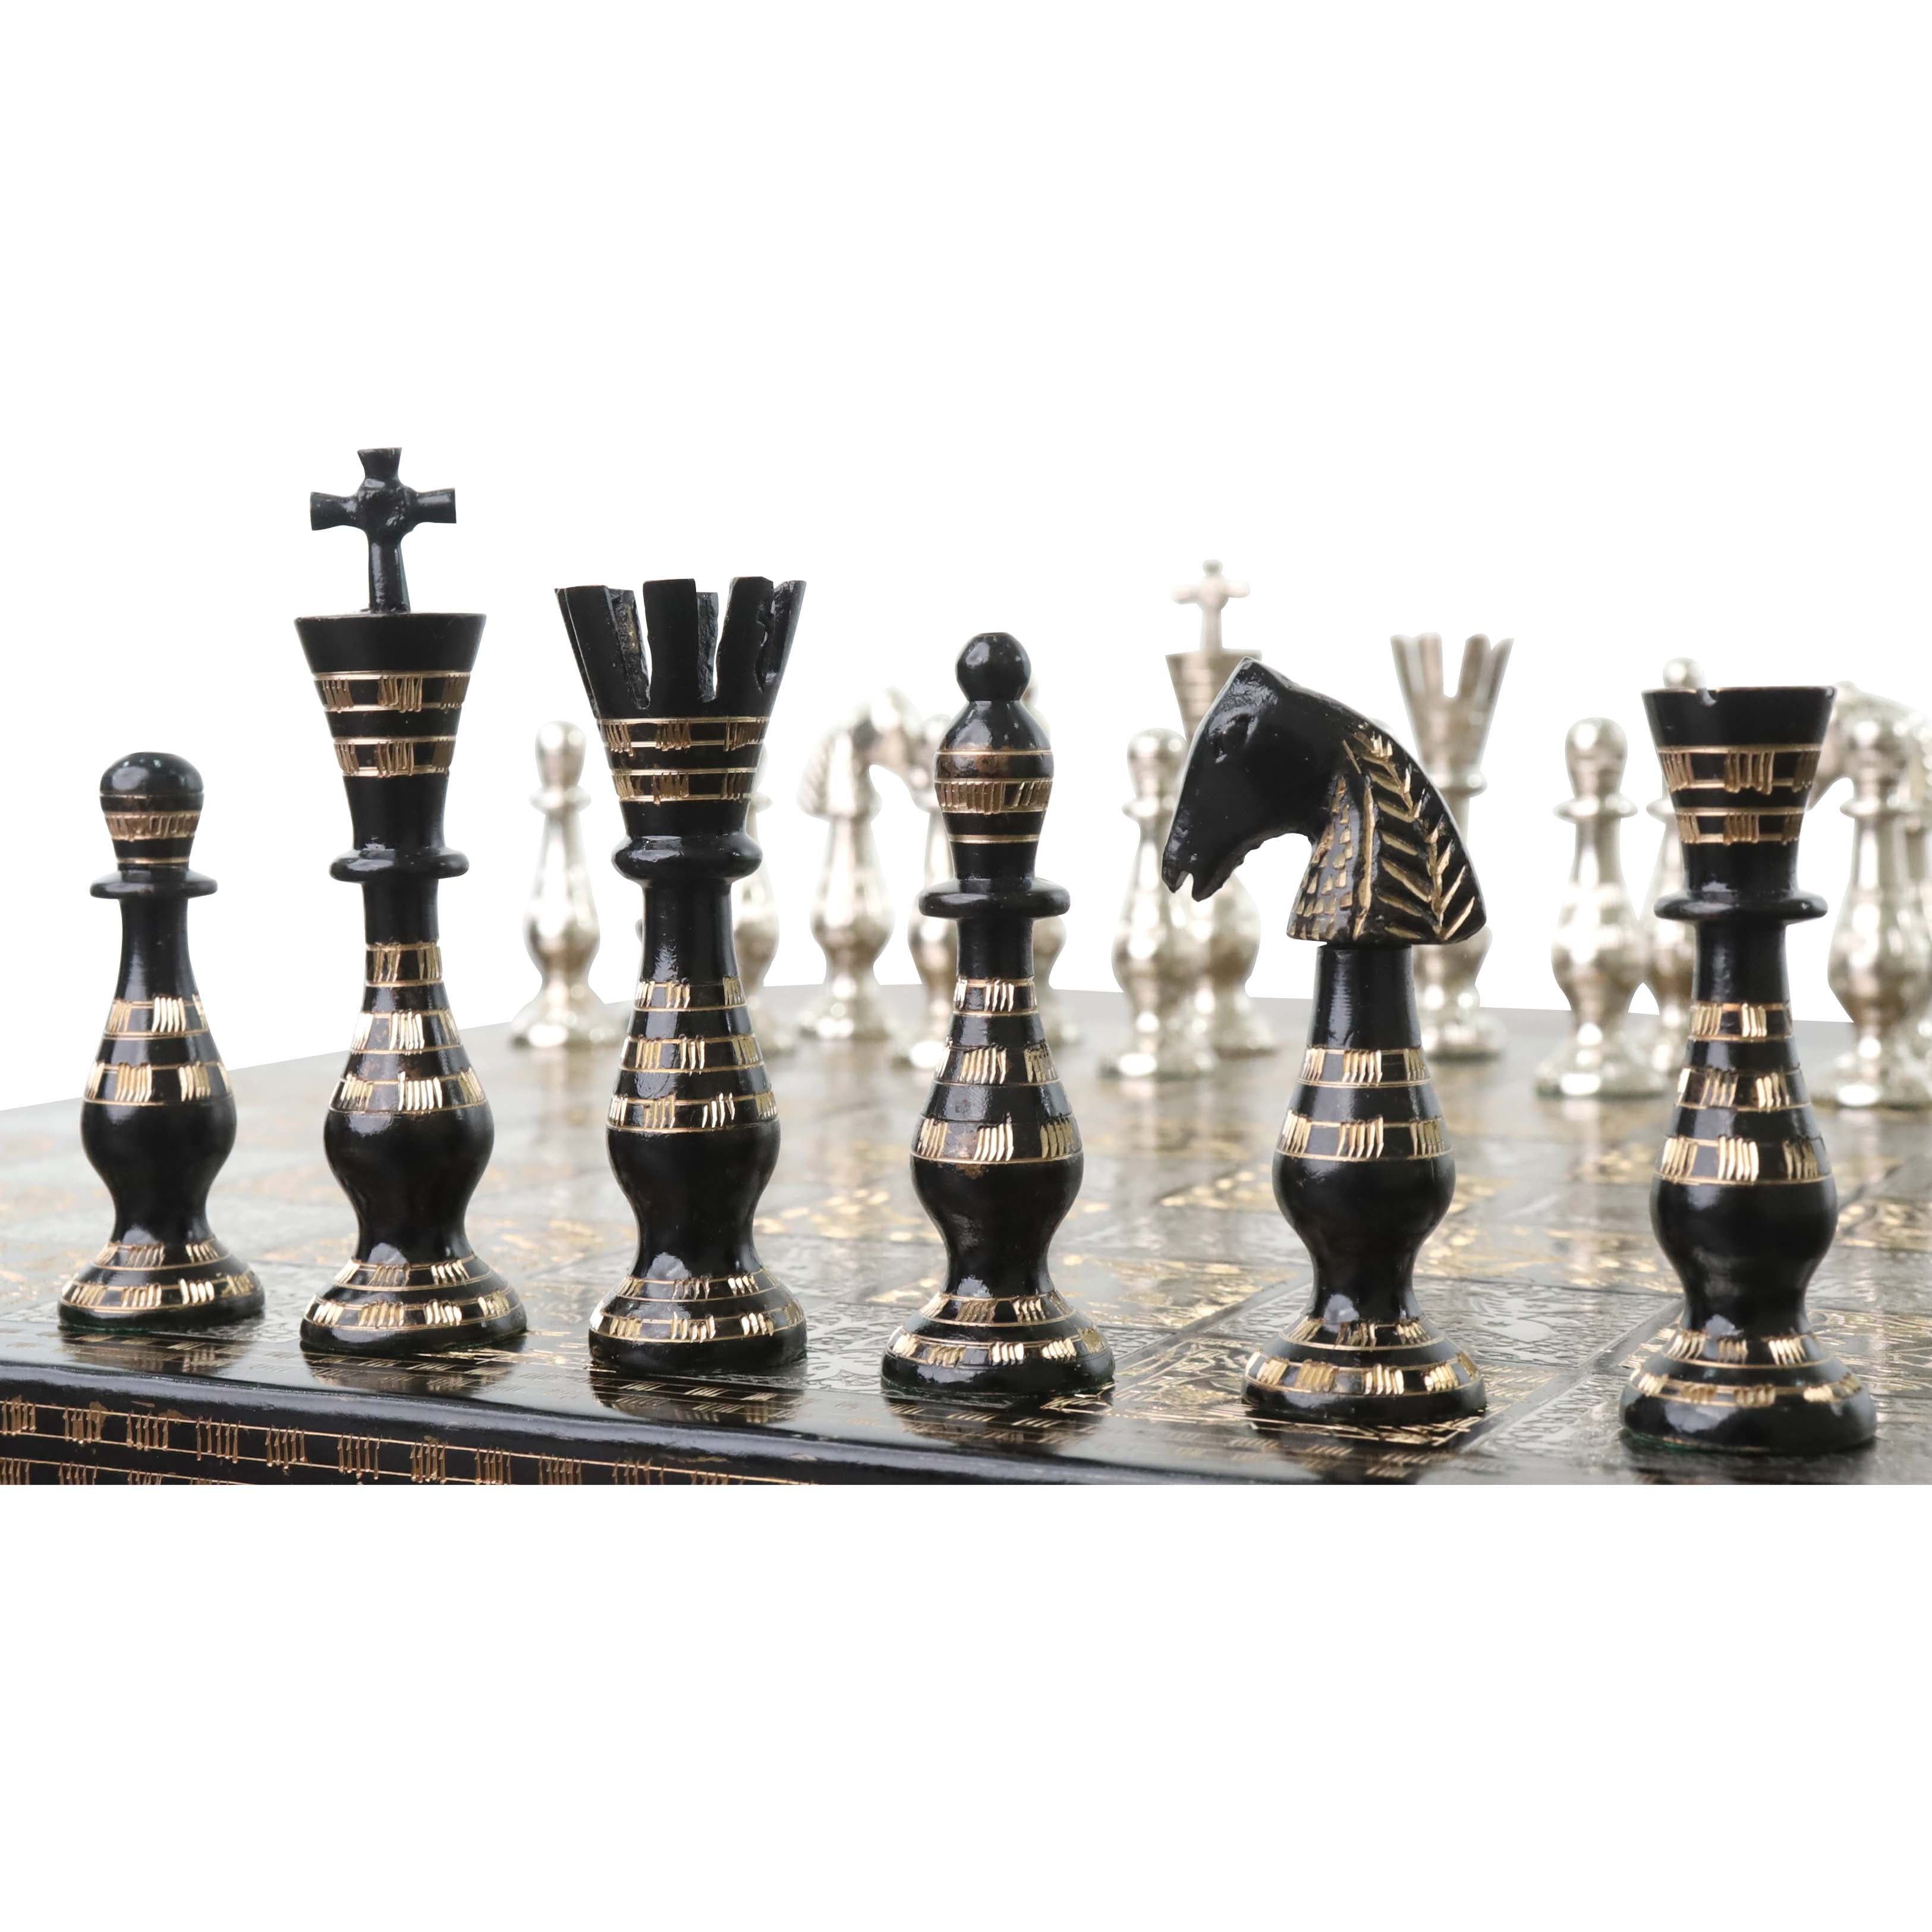 11.4 Inches Chess Set Personalized Wooden Chess Set Metal 